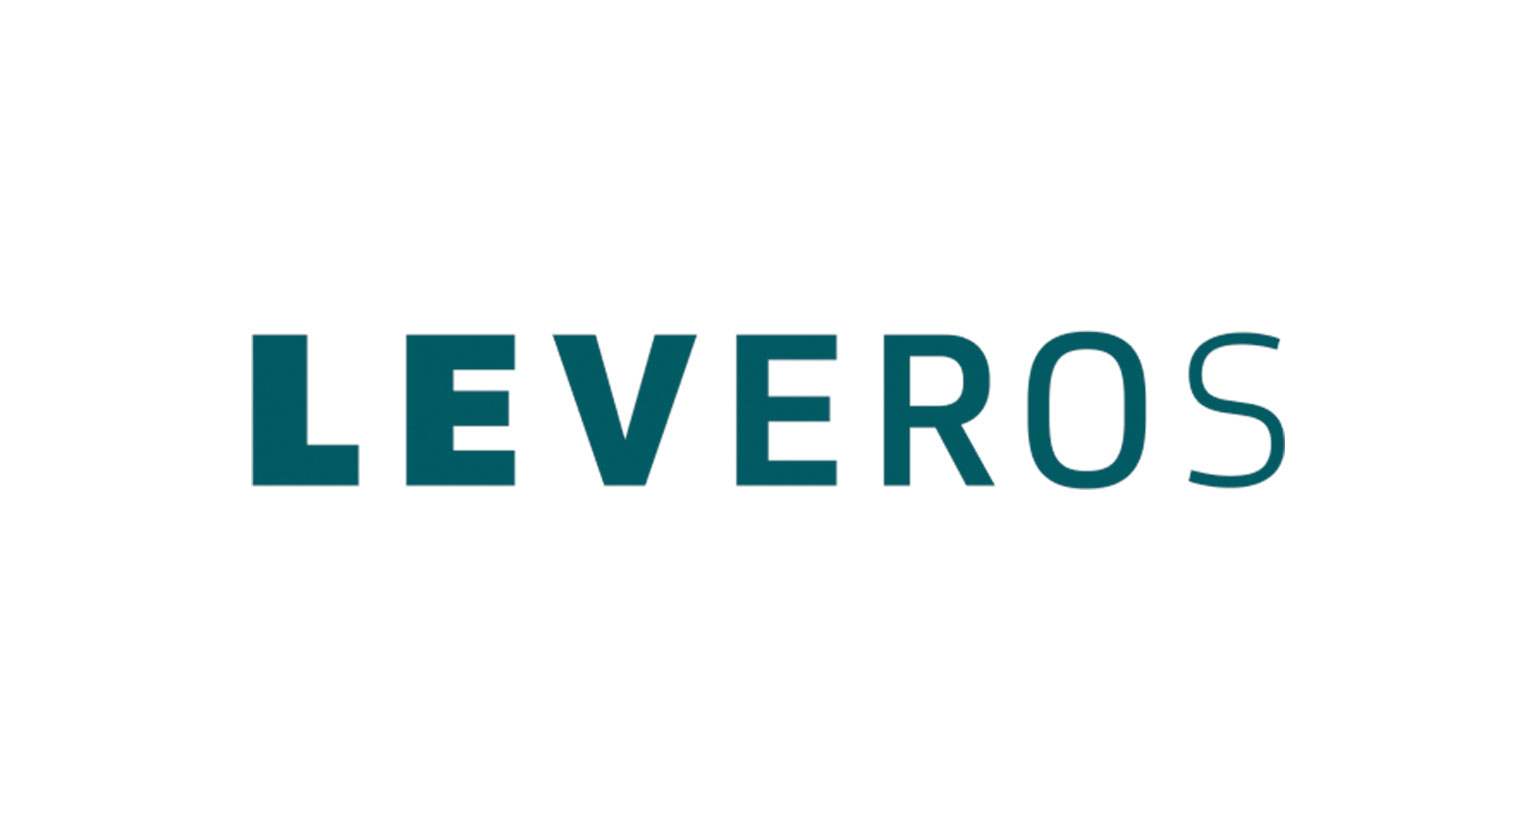 Leveros Integrates Marketplaces with Support From Jitterbit